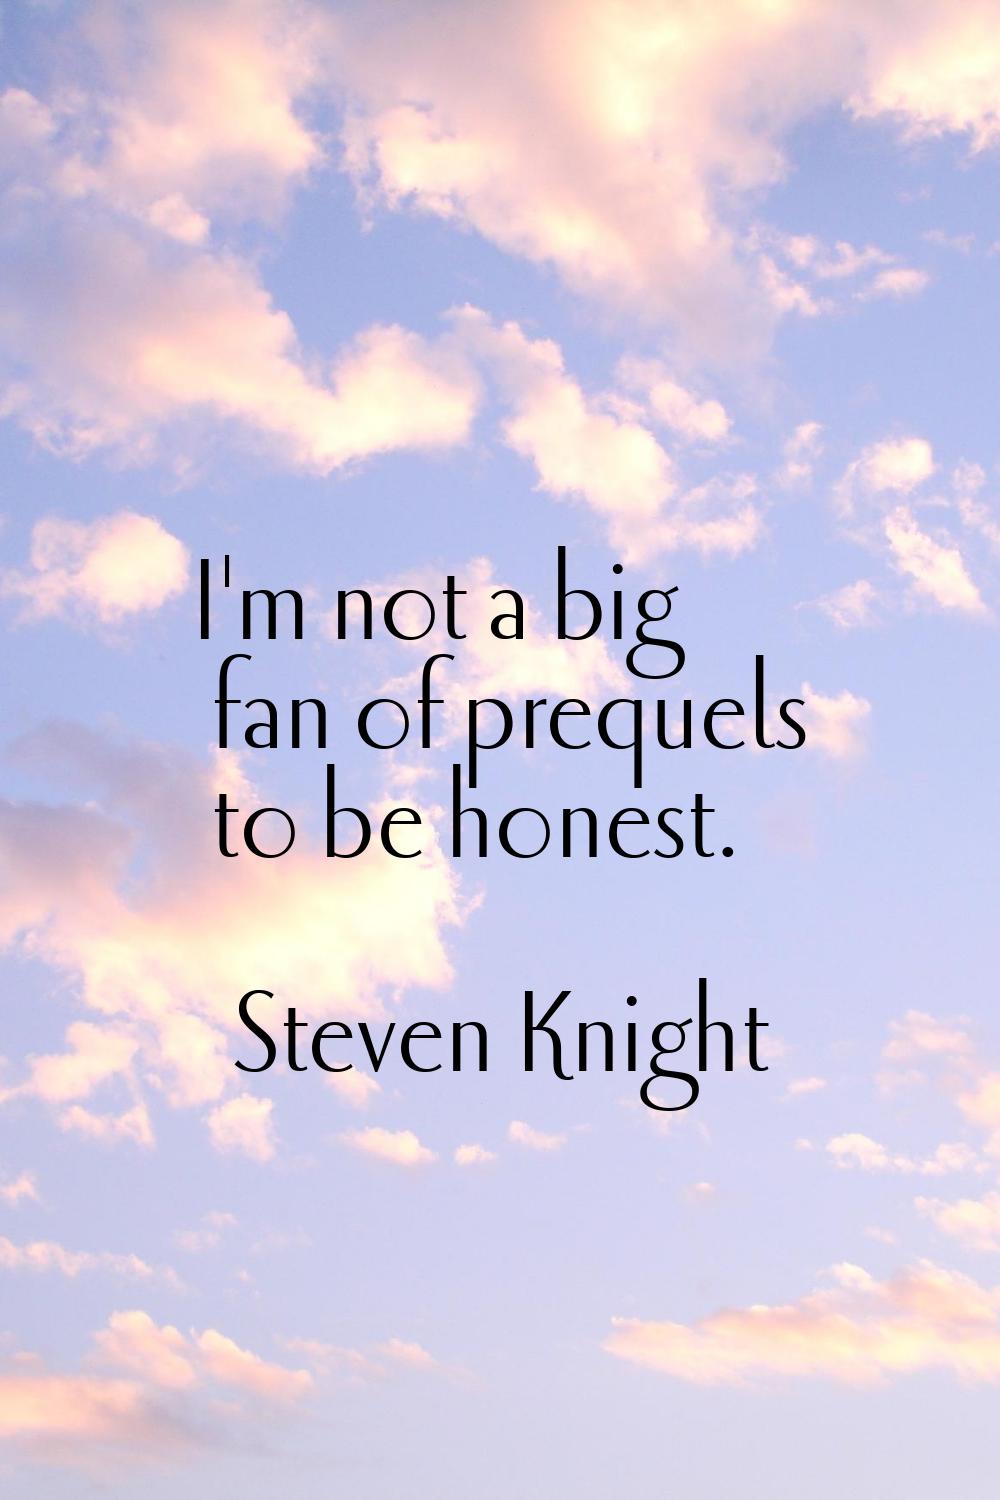 I'm not a big fan of prequels to be honest.